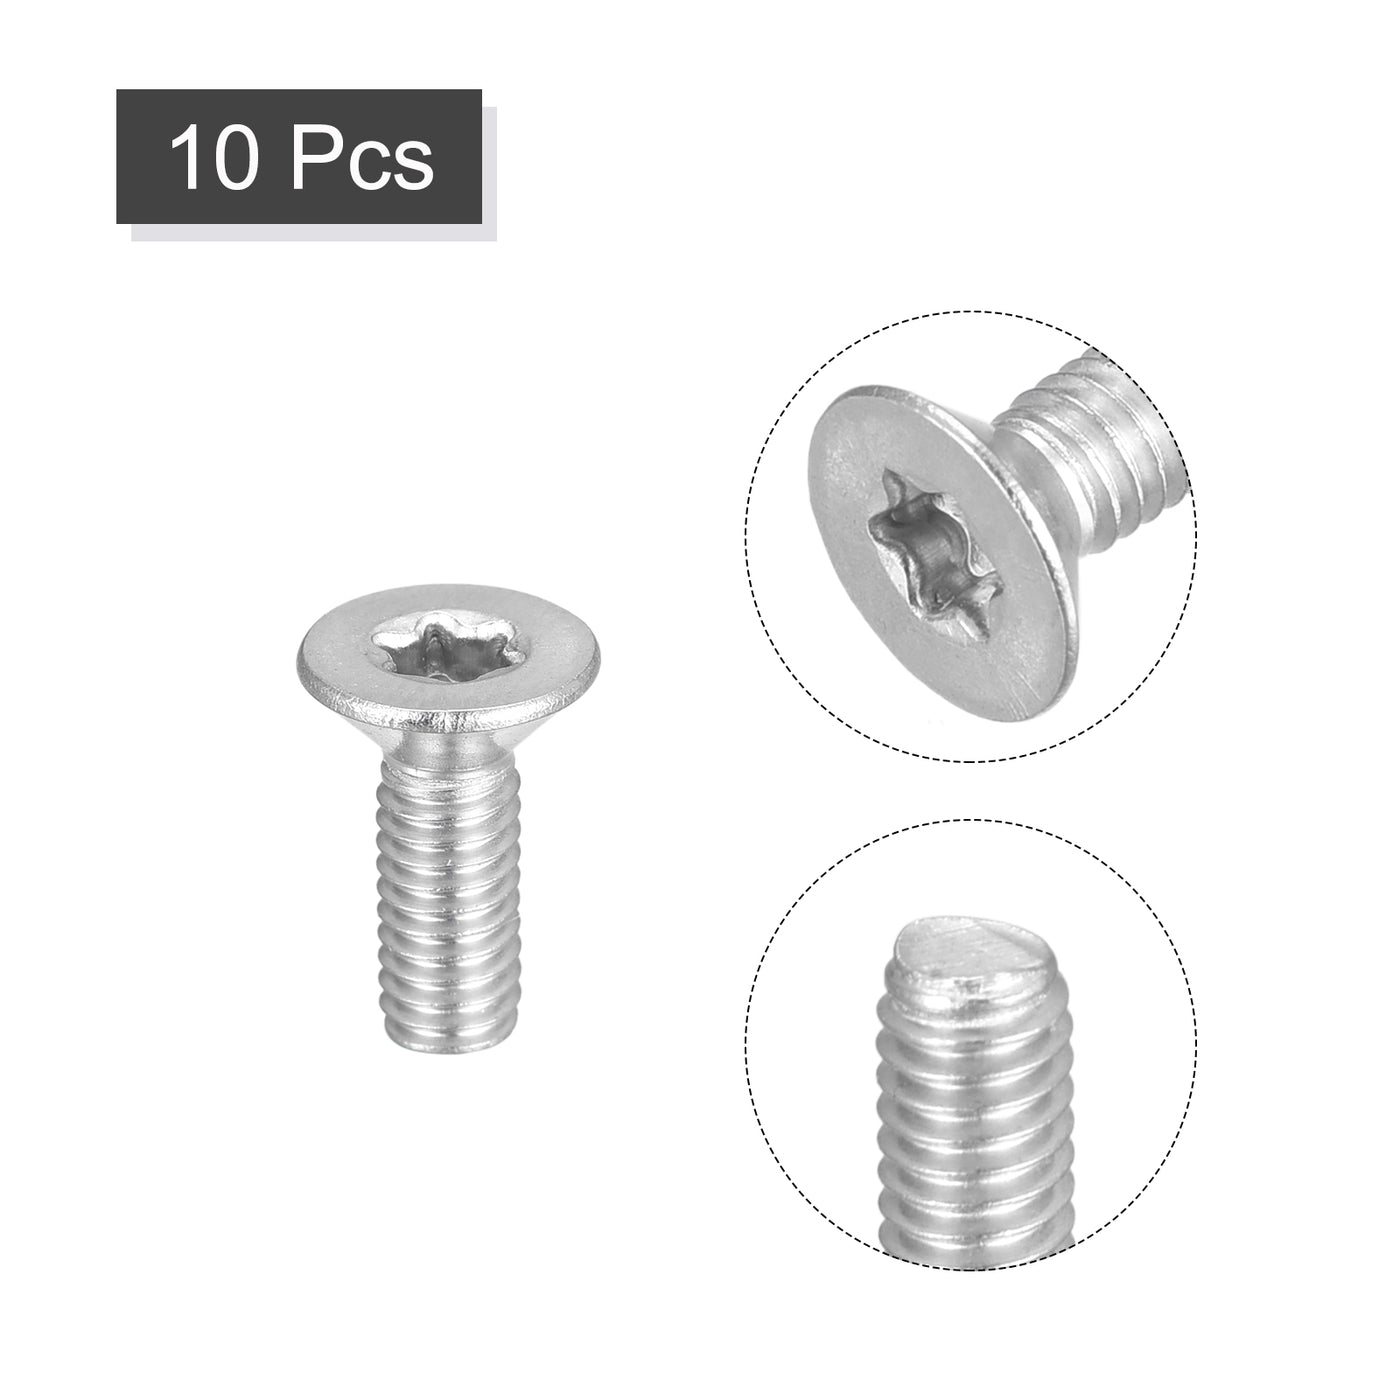 uxcell Uxcell M4x12mm Torx Security Screws, 10pcs 316 Stainless Steel Countersunk Head Screw